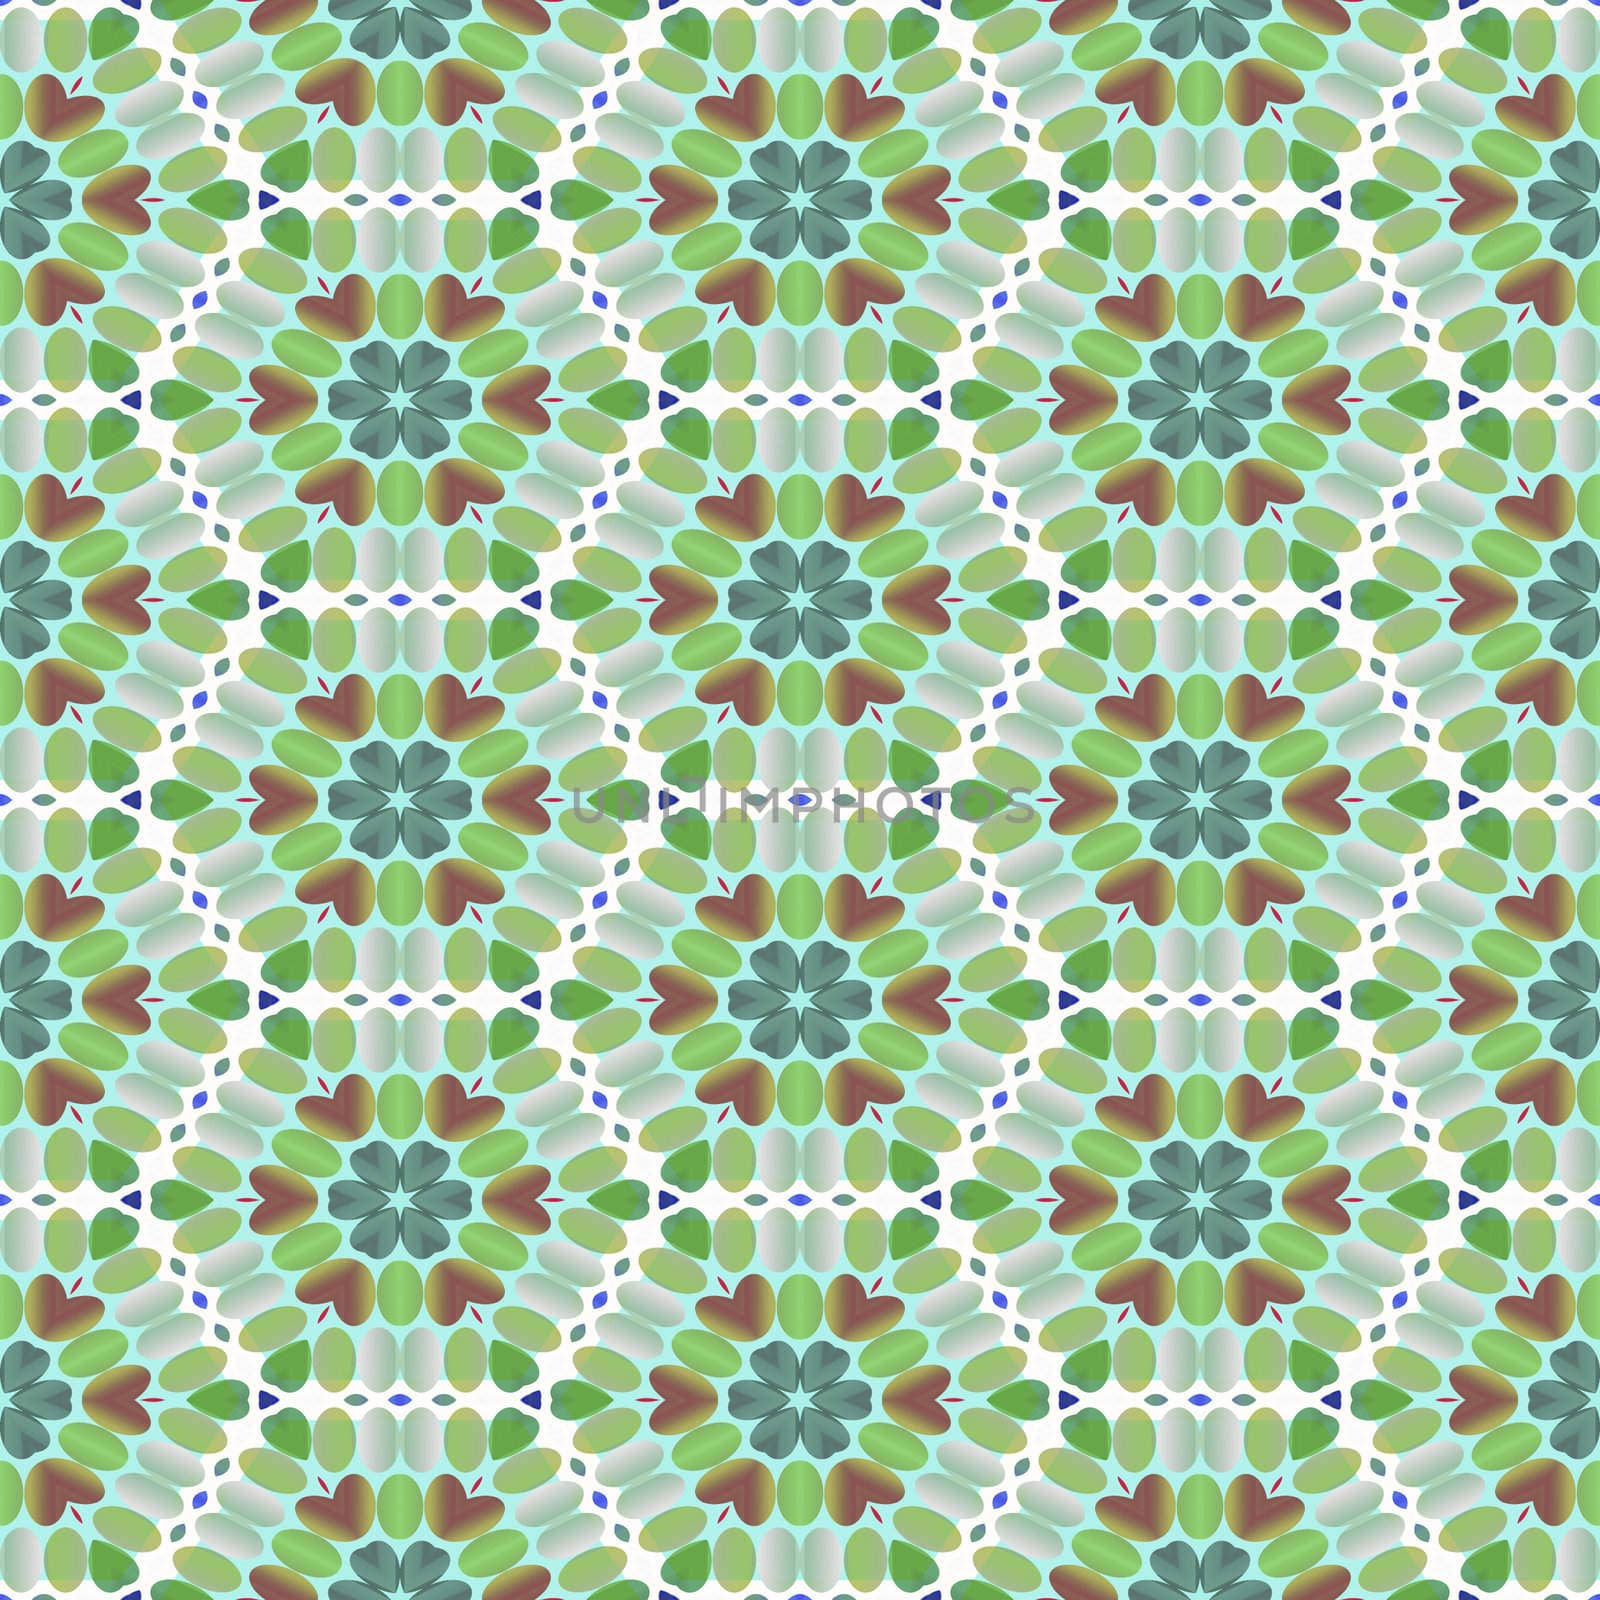 Retro background with green flowers. Seamless tile.